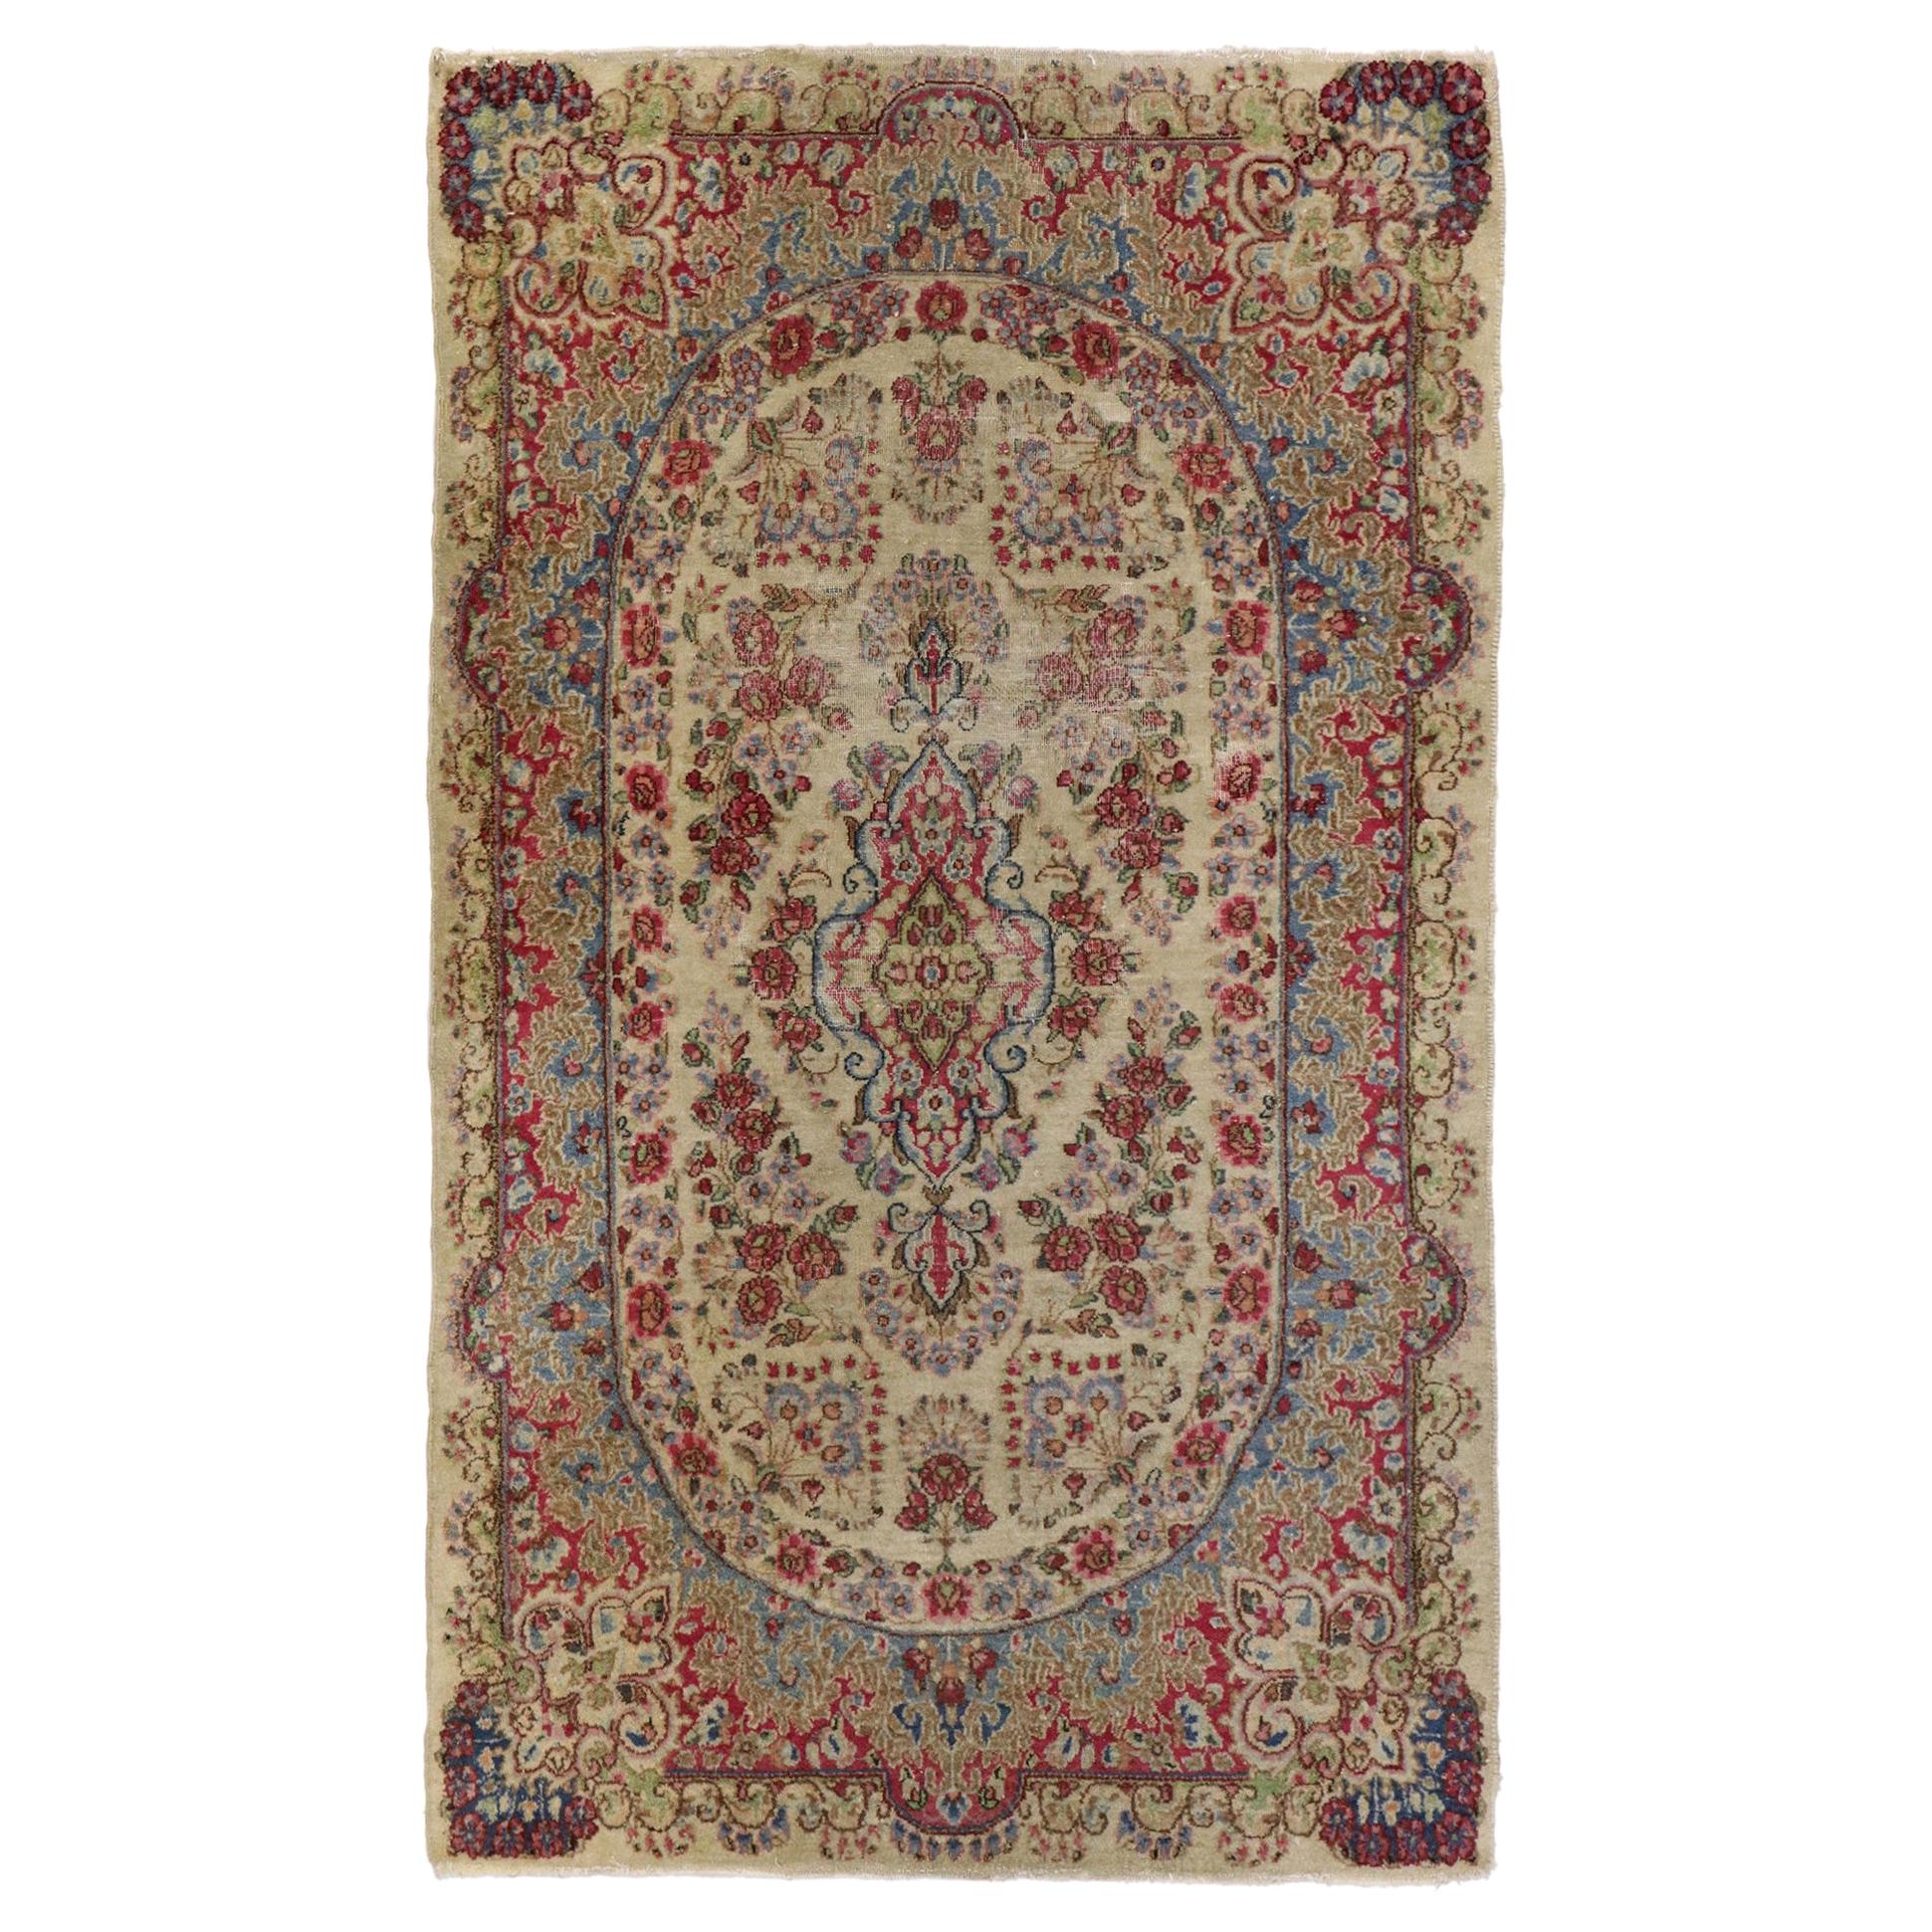 Distressed Antique Persian Kerman Rug with Shabby Chic Rustic French Style For Sale